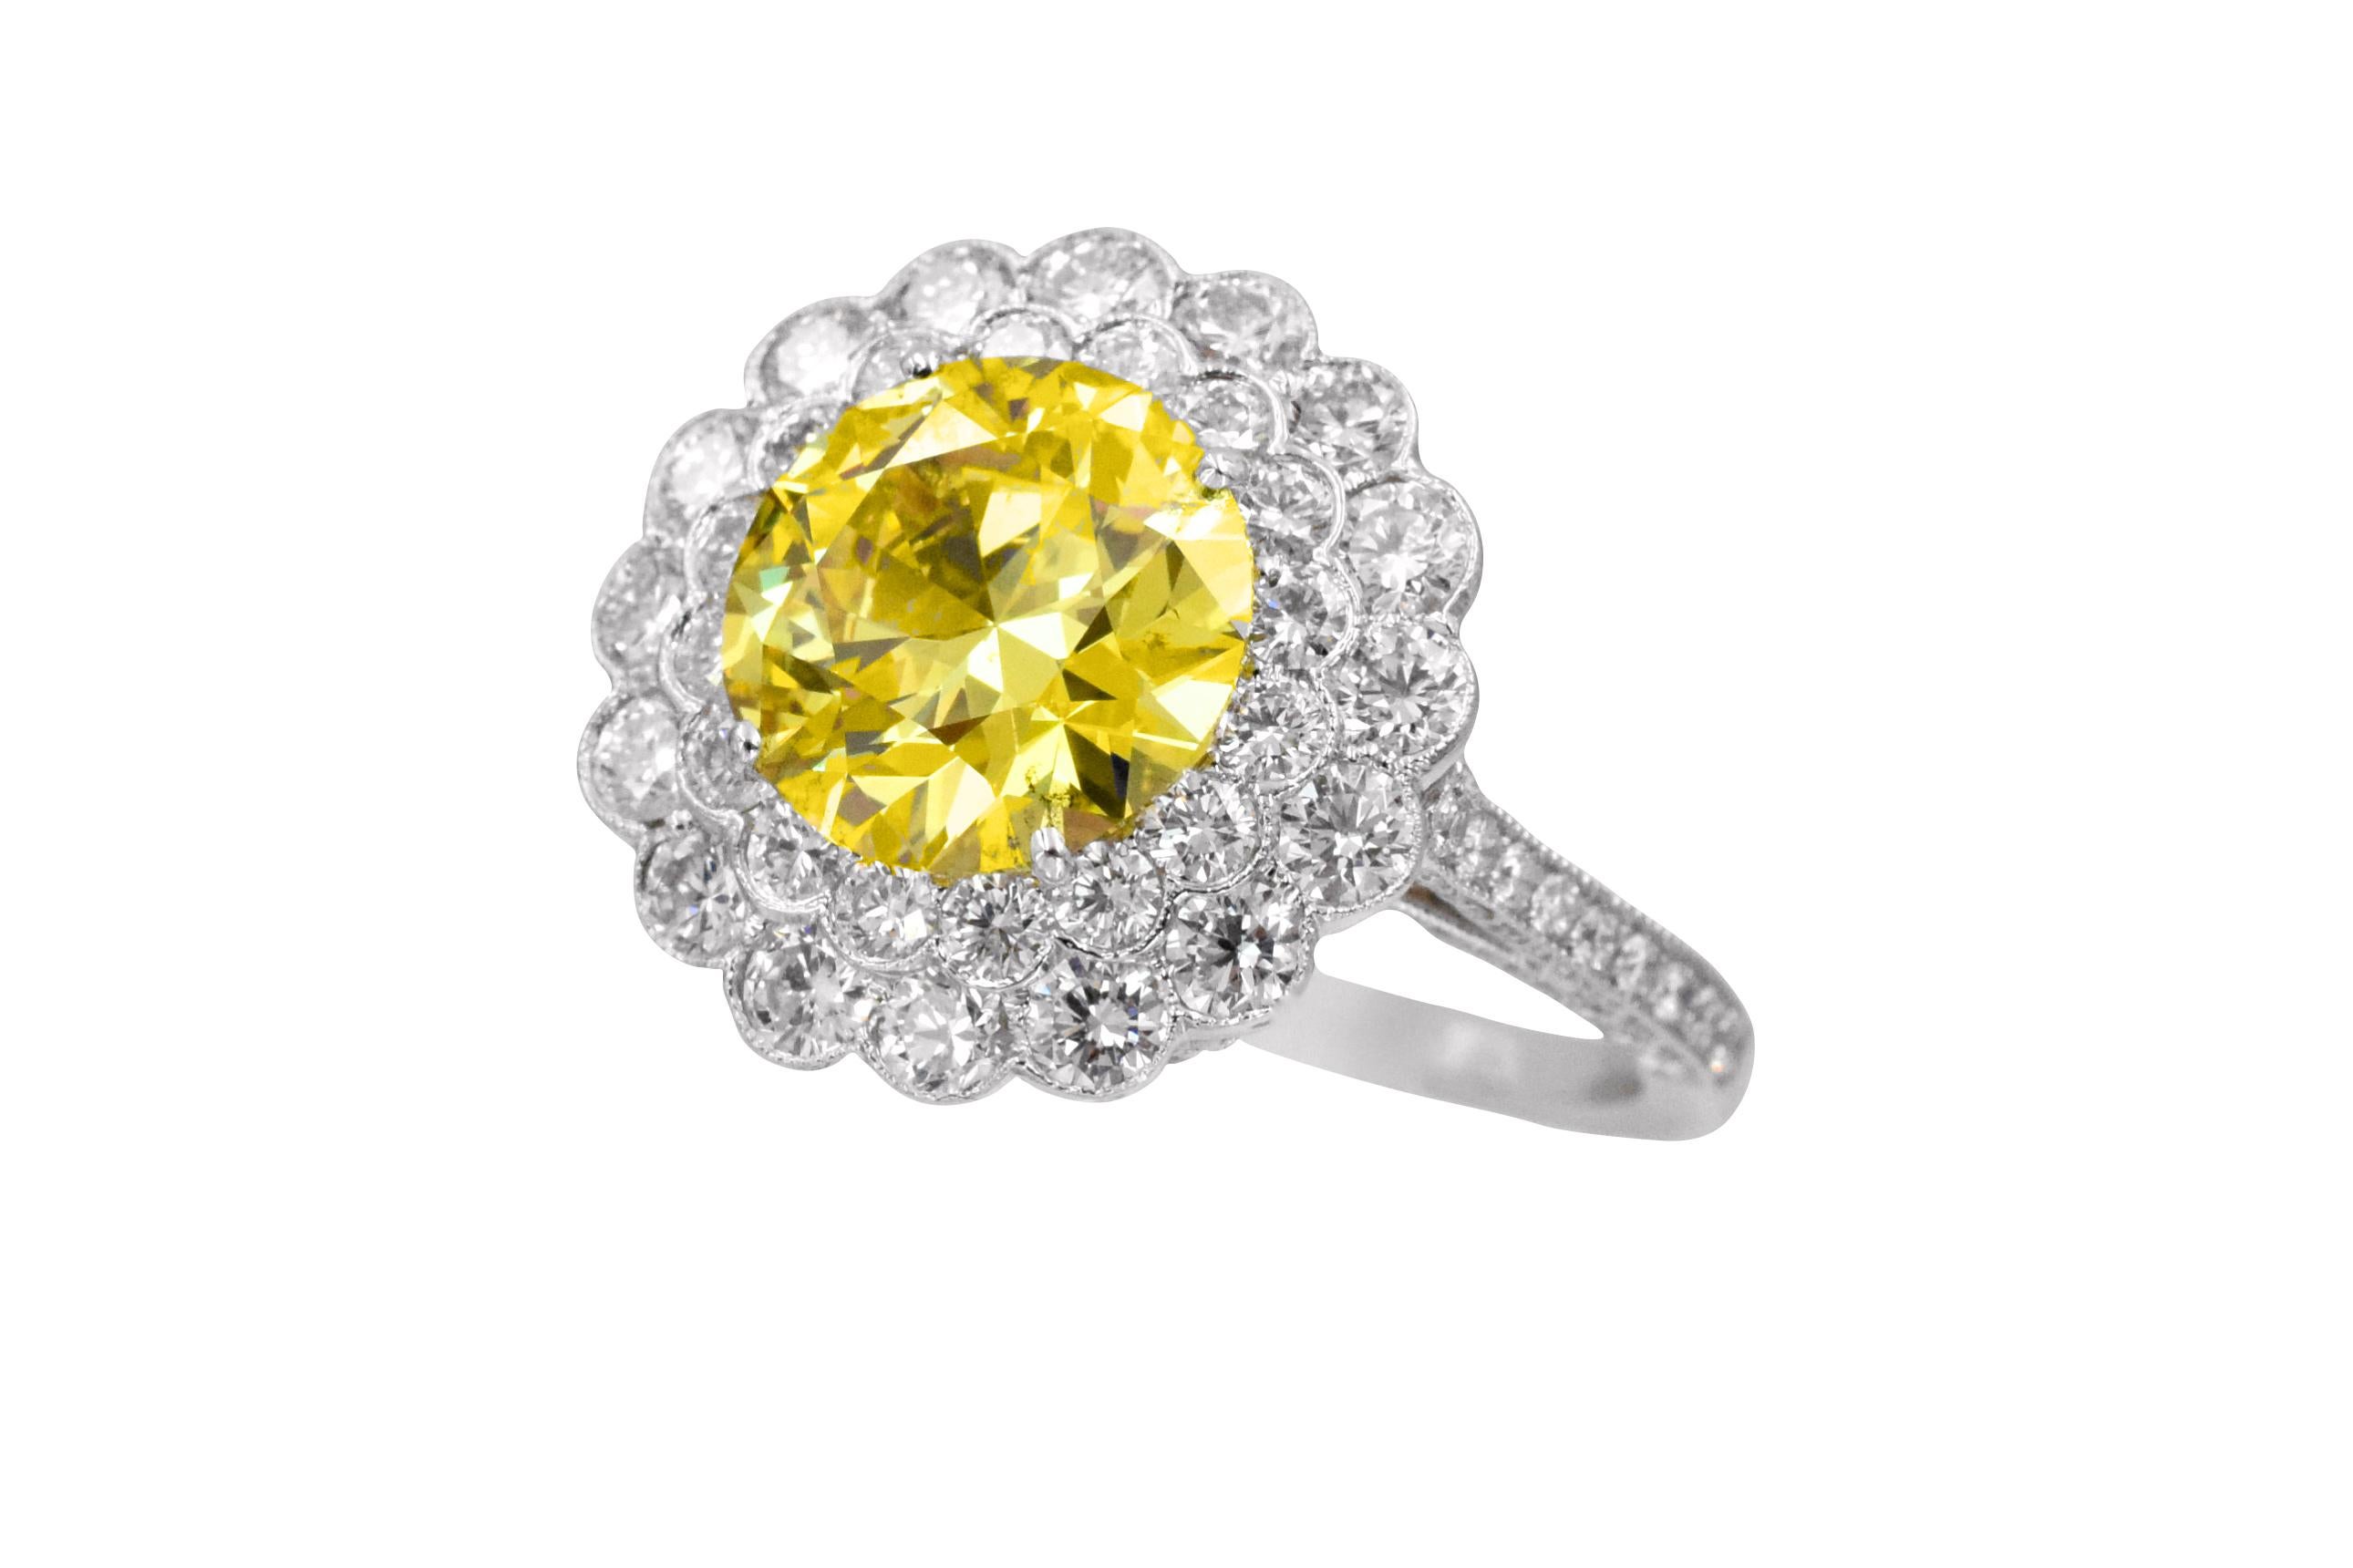 Tiffany & Co Diamond Ring
Center diamond is  3.01 carat  G.I.A. certified Fancy Vivid Yellow color  accented with round brilliant cut diamonds with total weight of 1.89carat the shank further highlighted with round diamonds.
 G.I.A. 
 Ring Size is